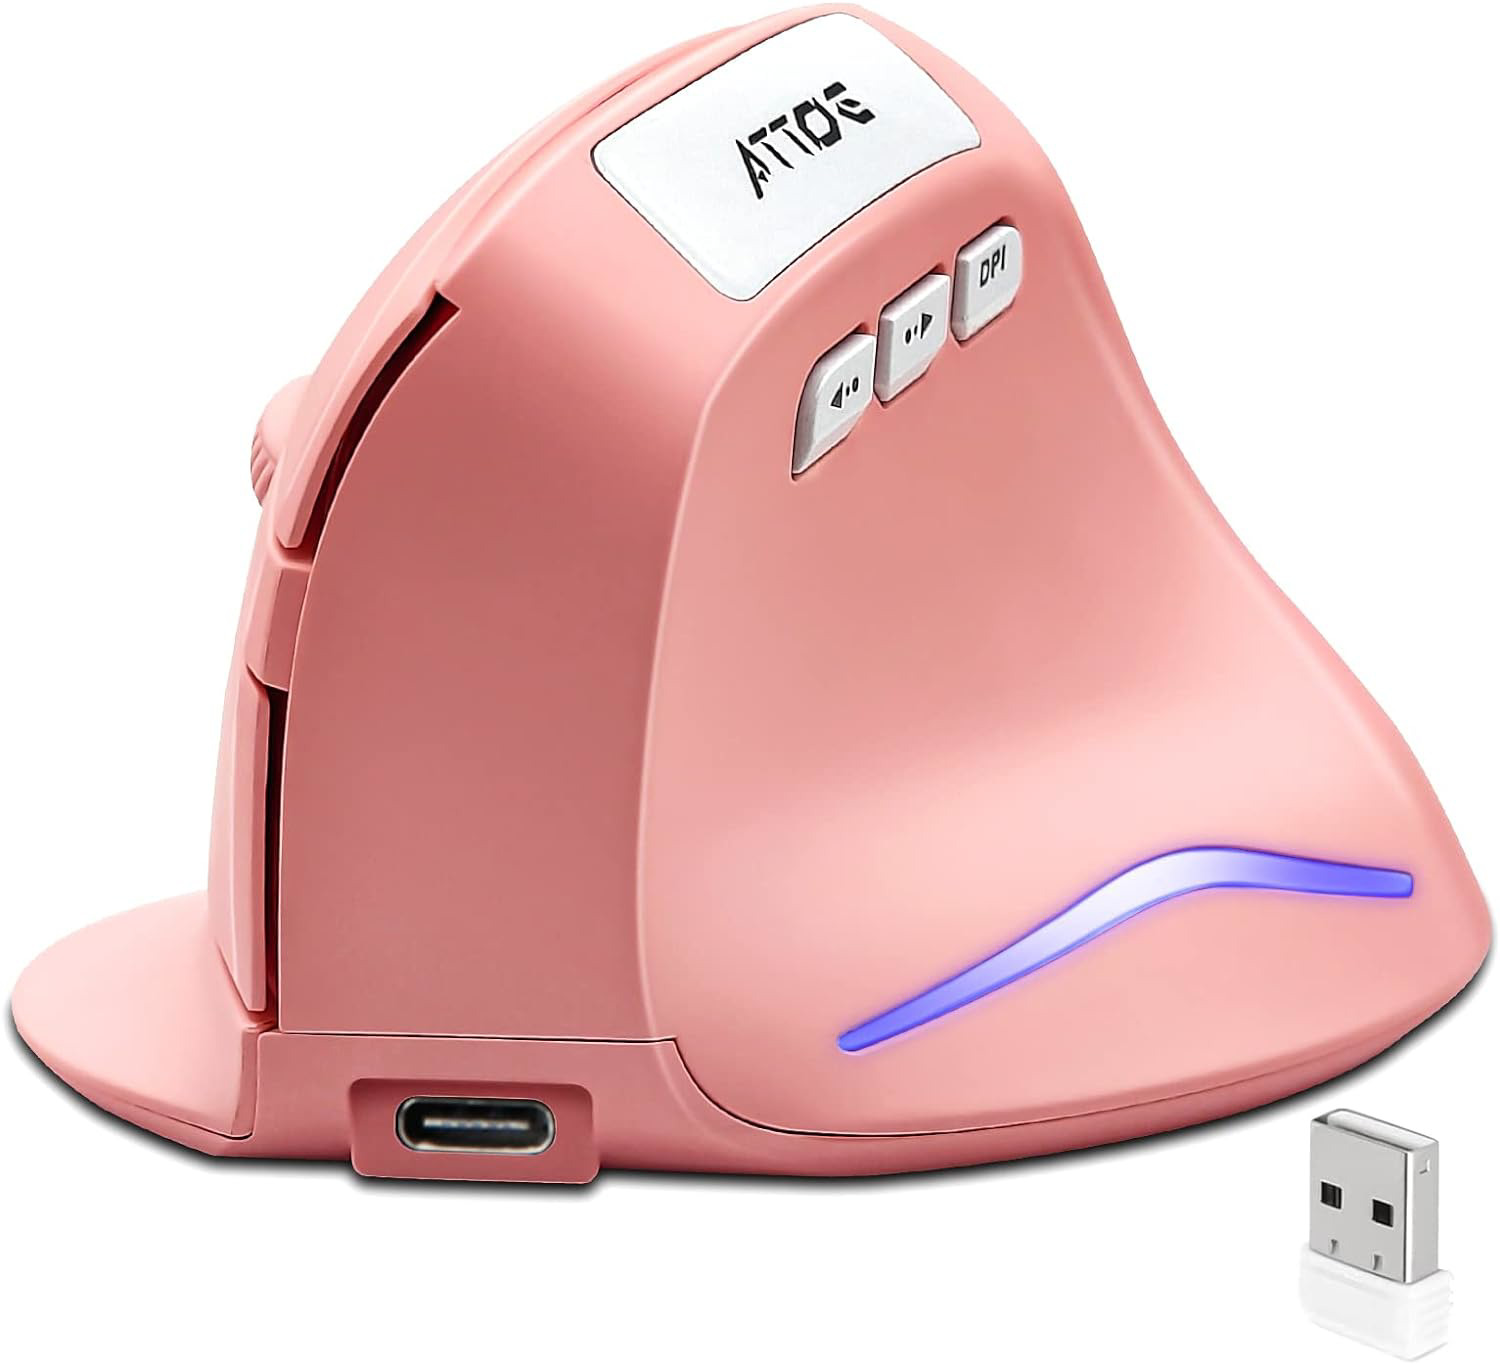 Attoe Ergonomic Mouse,2.4G Wireless Vertical Mouse Pink Computer Mouse with 3 Ad